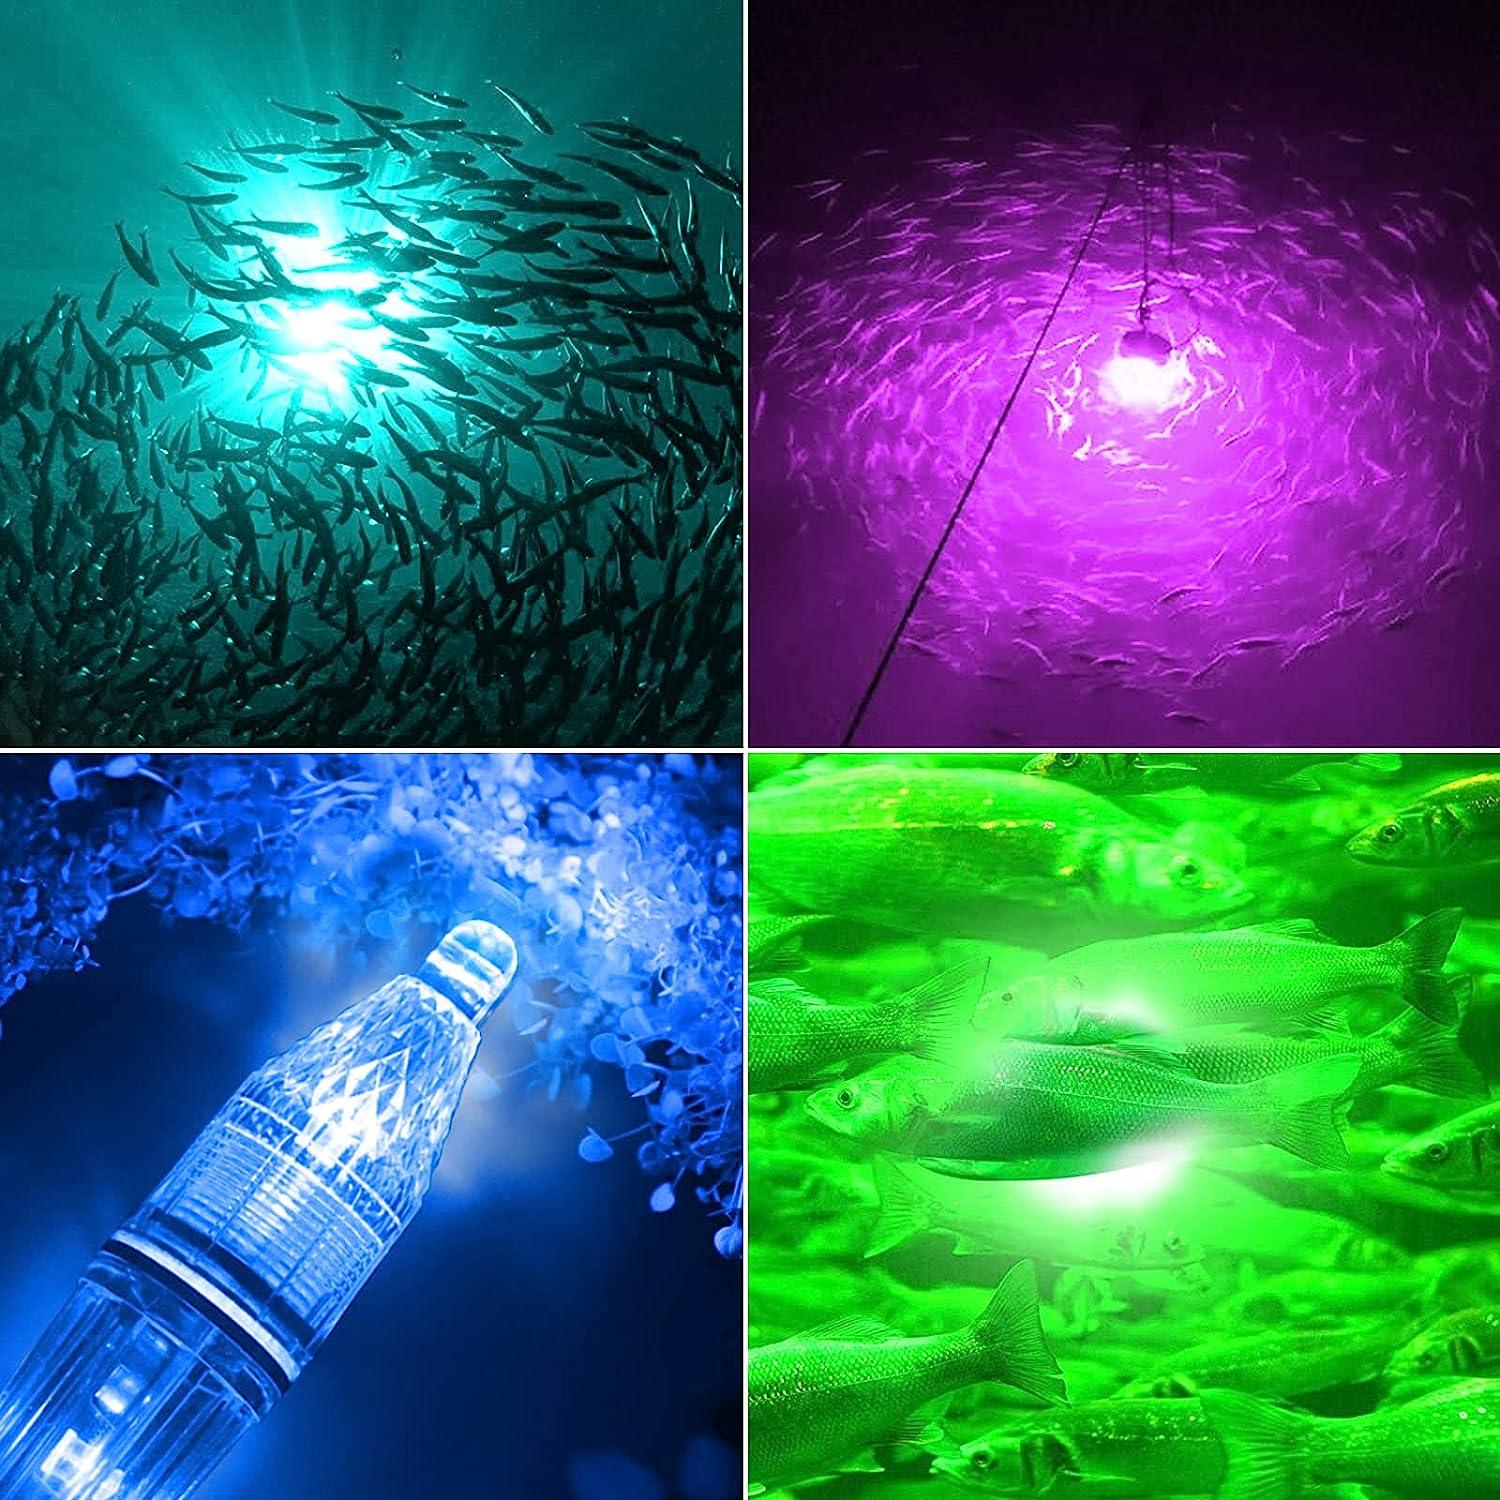 Deep Drop LED Fishing Light with Clip Underwater Fish Attracting